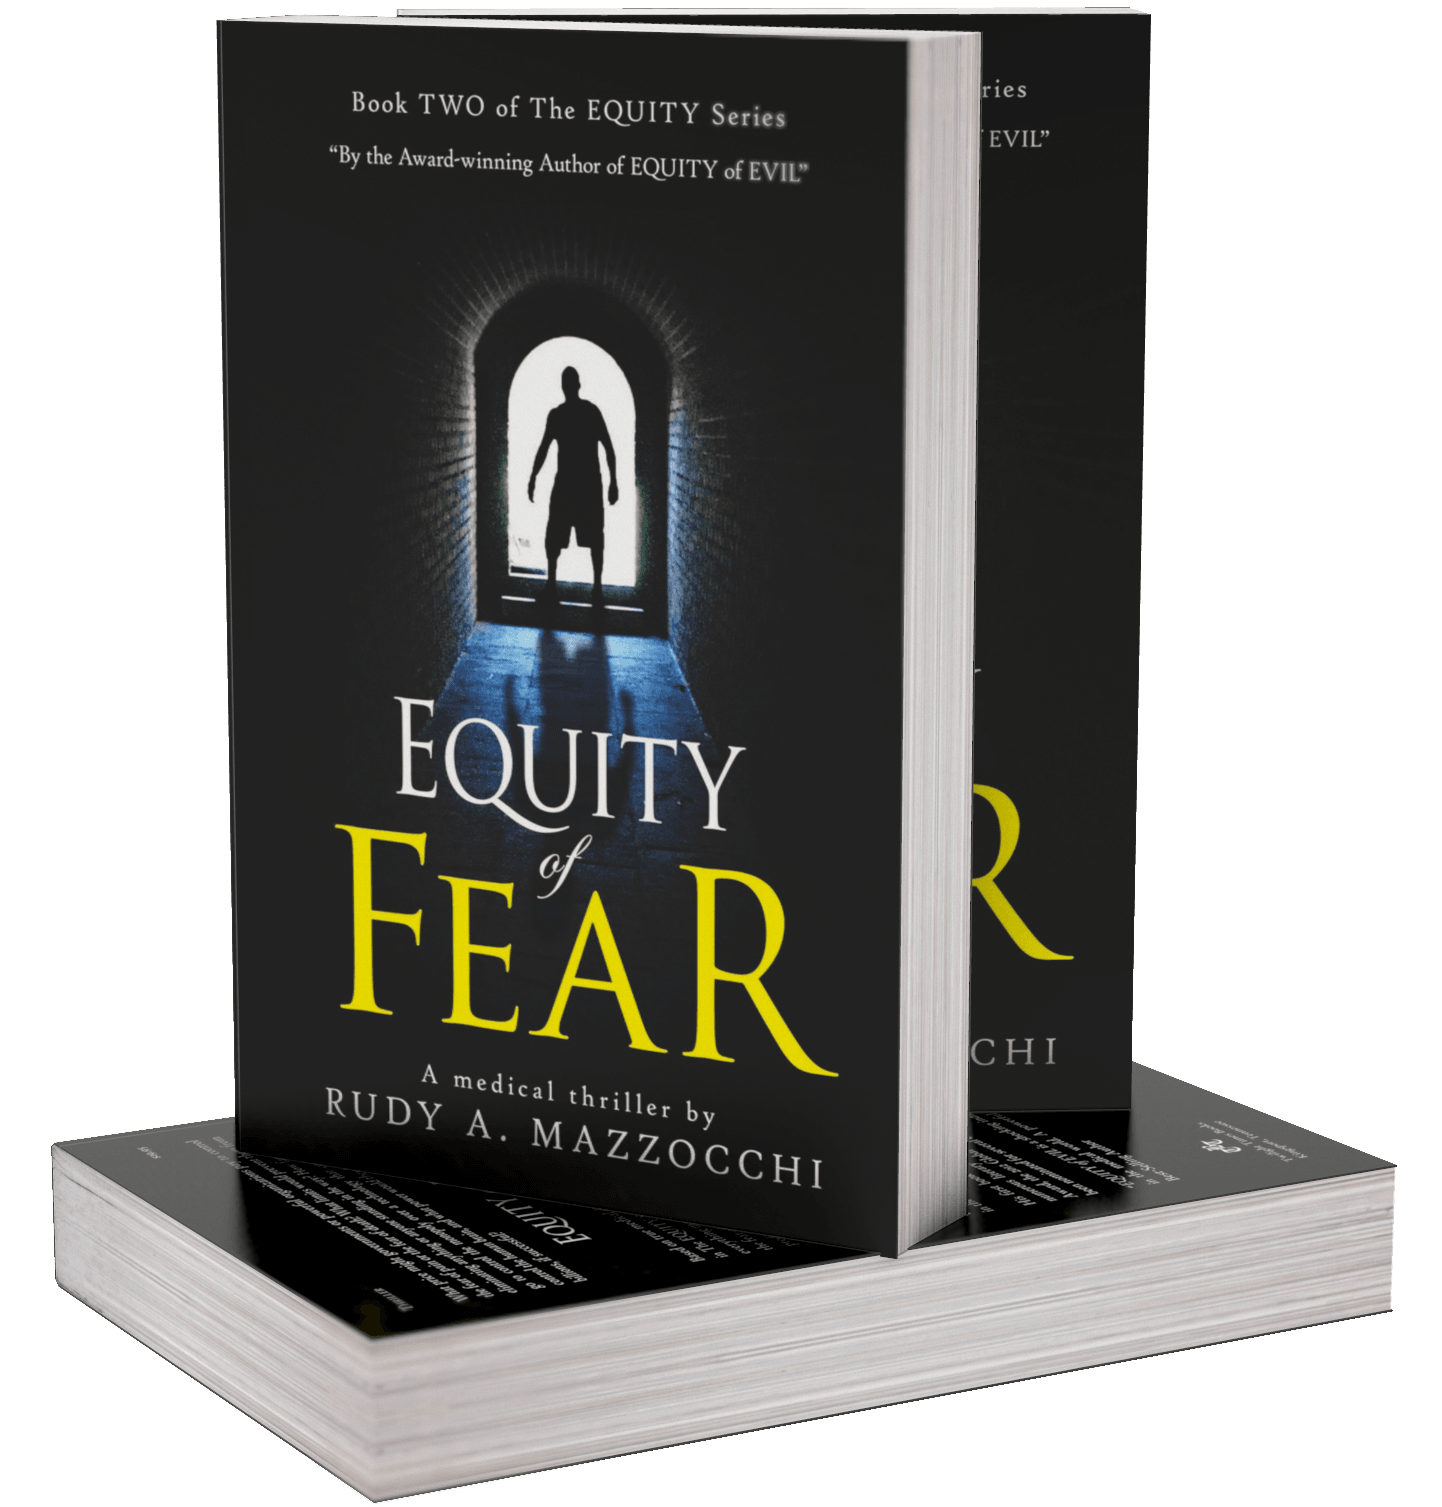 EQUITY OF fear